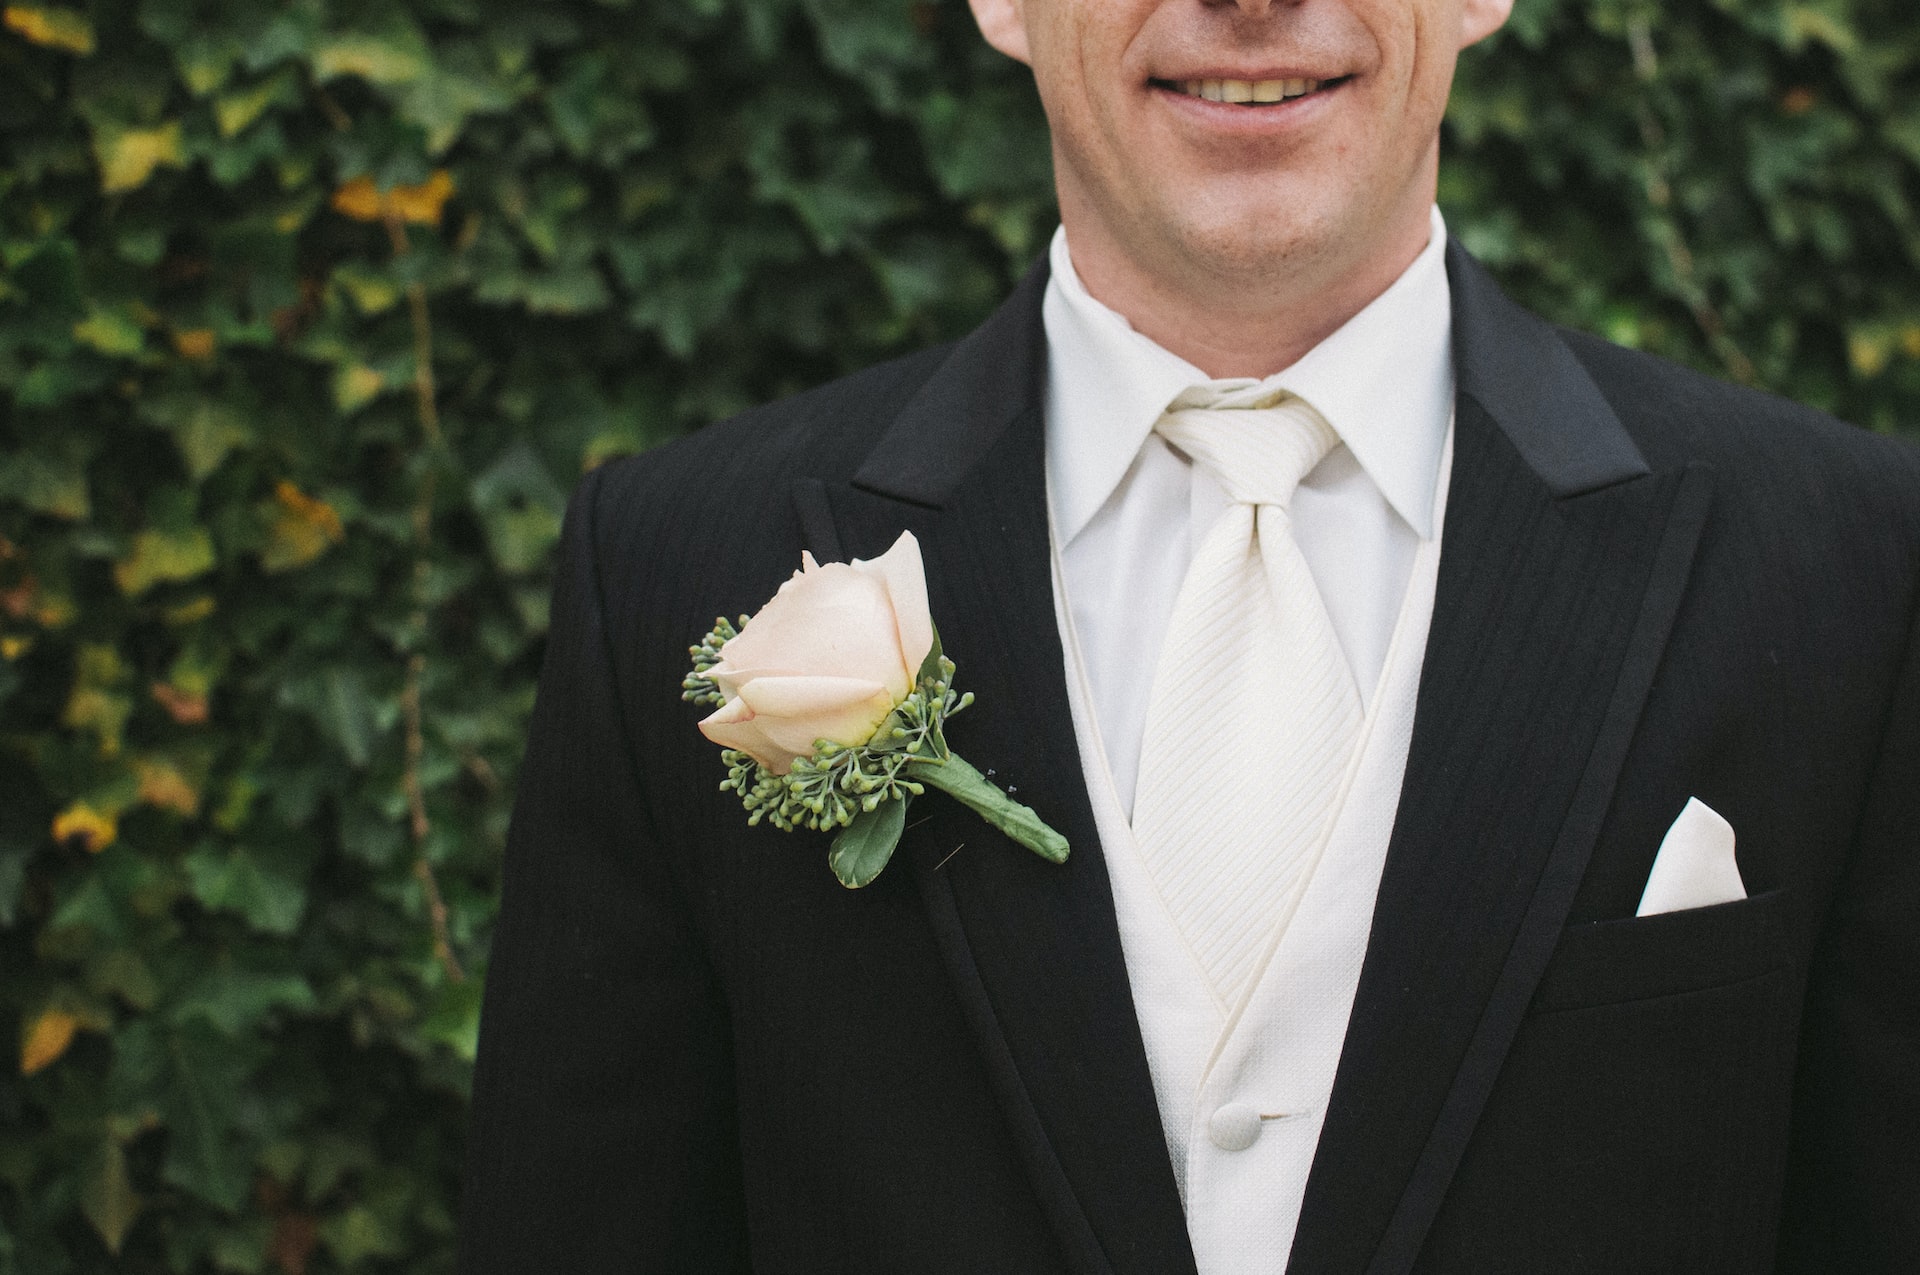 Why & How To Choose the Perfect Souvenir For Groomsmen?